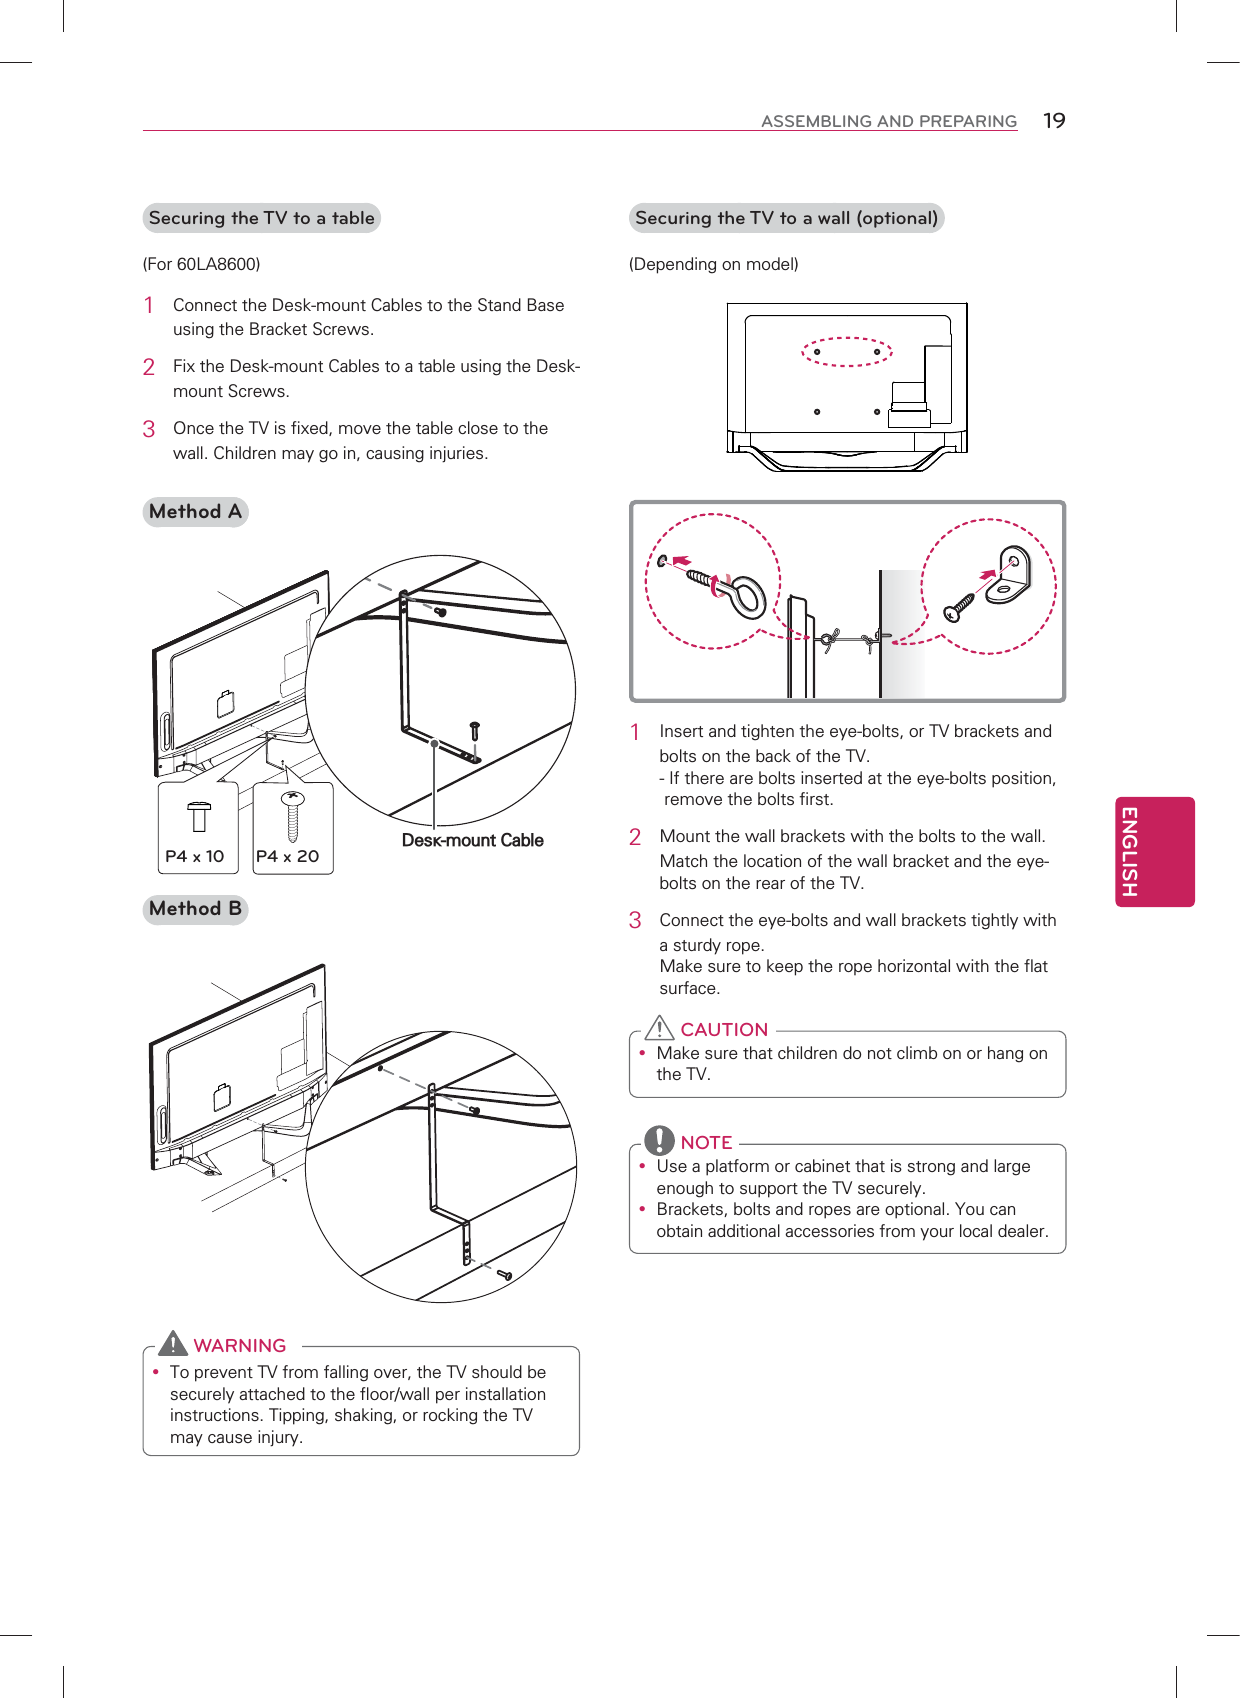 ENGLISH19ASSEMBLING AND PREPARINGSecuring the TV to a table(For 60LA8600)1  Connect the Desk-mount Cables to the Stand Base using the Bracket Screws.2  Fix the Desk-mount Cables to a table using the Desk-mount Screws.3 Once the TV is fixed, move the table close to the wall. Children may go in, causing injuries.Method ADesk-mount CableP4 x 10 P4 x 20Method By To prevent TV from falling over, the TV should be securely attached to the floor/wall per installation instructions. Tipping, shaking, or rocking the TV may cause injury. WARNINGSecuring the TV to a wall (optional)(Depending on model)1  Insert and tighten the eye-bolts, or TV brackets and bolts on the back of the TV. -  If there are bolts inserted at the eye-bolts position, remove the bolts first.2  Mount the wall brackets with the bolts to the wall.Match the location of the wall bracket and the eye-bolts on the rear of the TV.3  Connect the eye-bolts and wall brackets tightly with a sturdy rope. Make sure to keep the rope horizontal with the flat surface.y Make sure that children do not climb on or hang on the TV. CAUTIONy Use a platform or cabinet that is strong and large enough to support the TV securely.y Brackets, bolts and ropes are optional. You can obtain additional accessories from your local dealer. NOTE